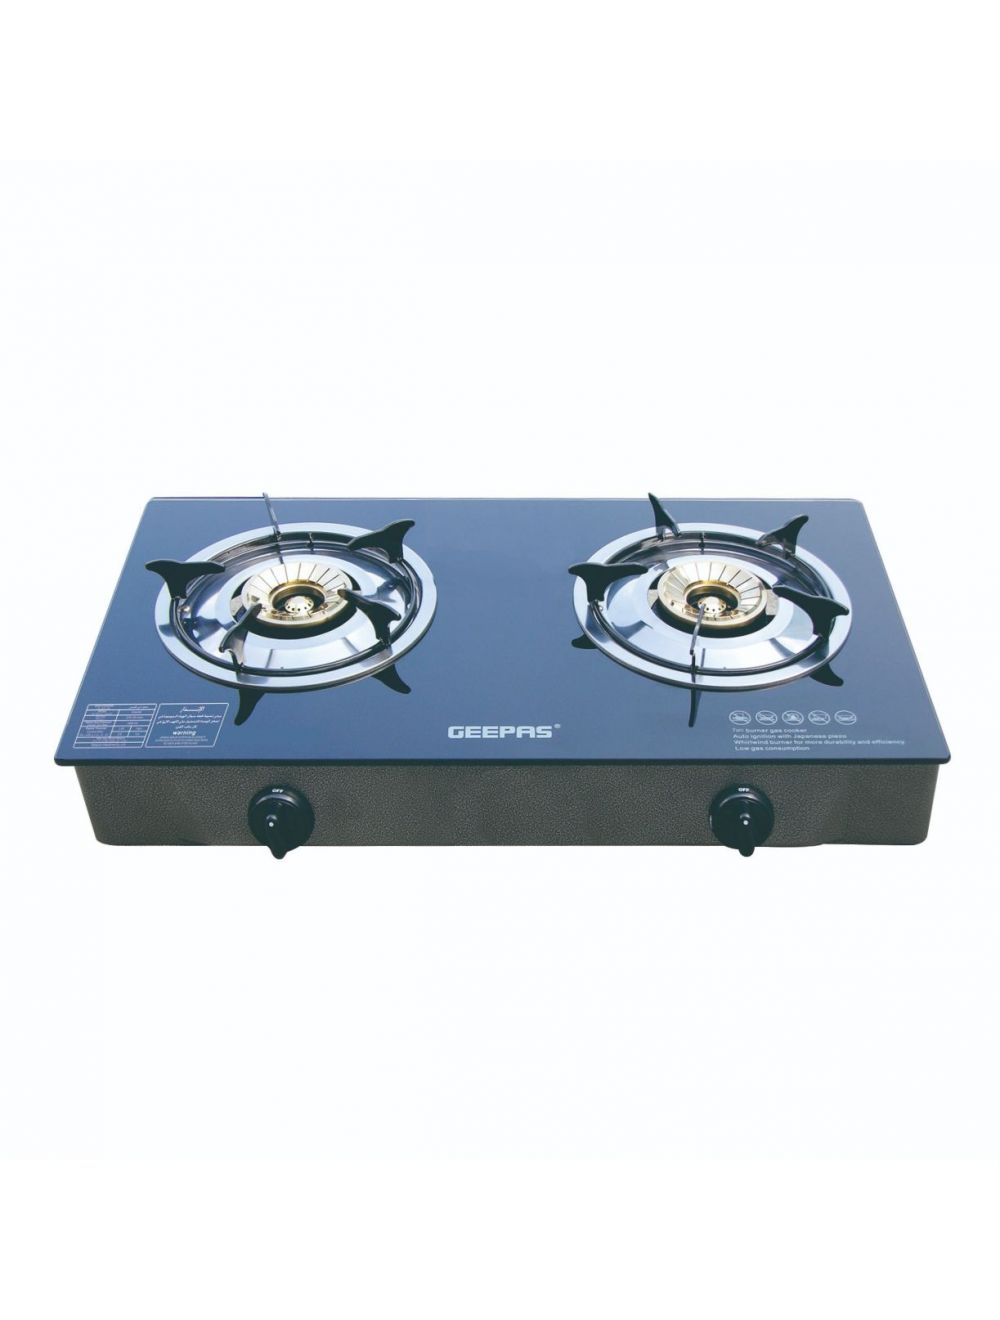 Shop Geepas Two Gas Burner Auto Ignition Gas Stove | Kitchen Accessories | Halabh.com